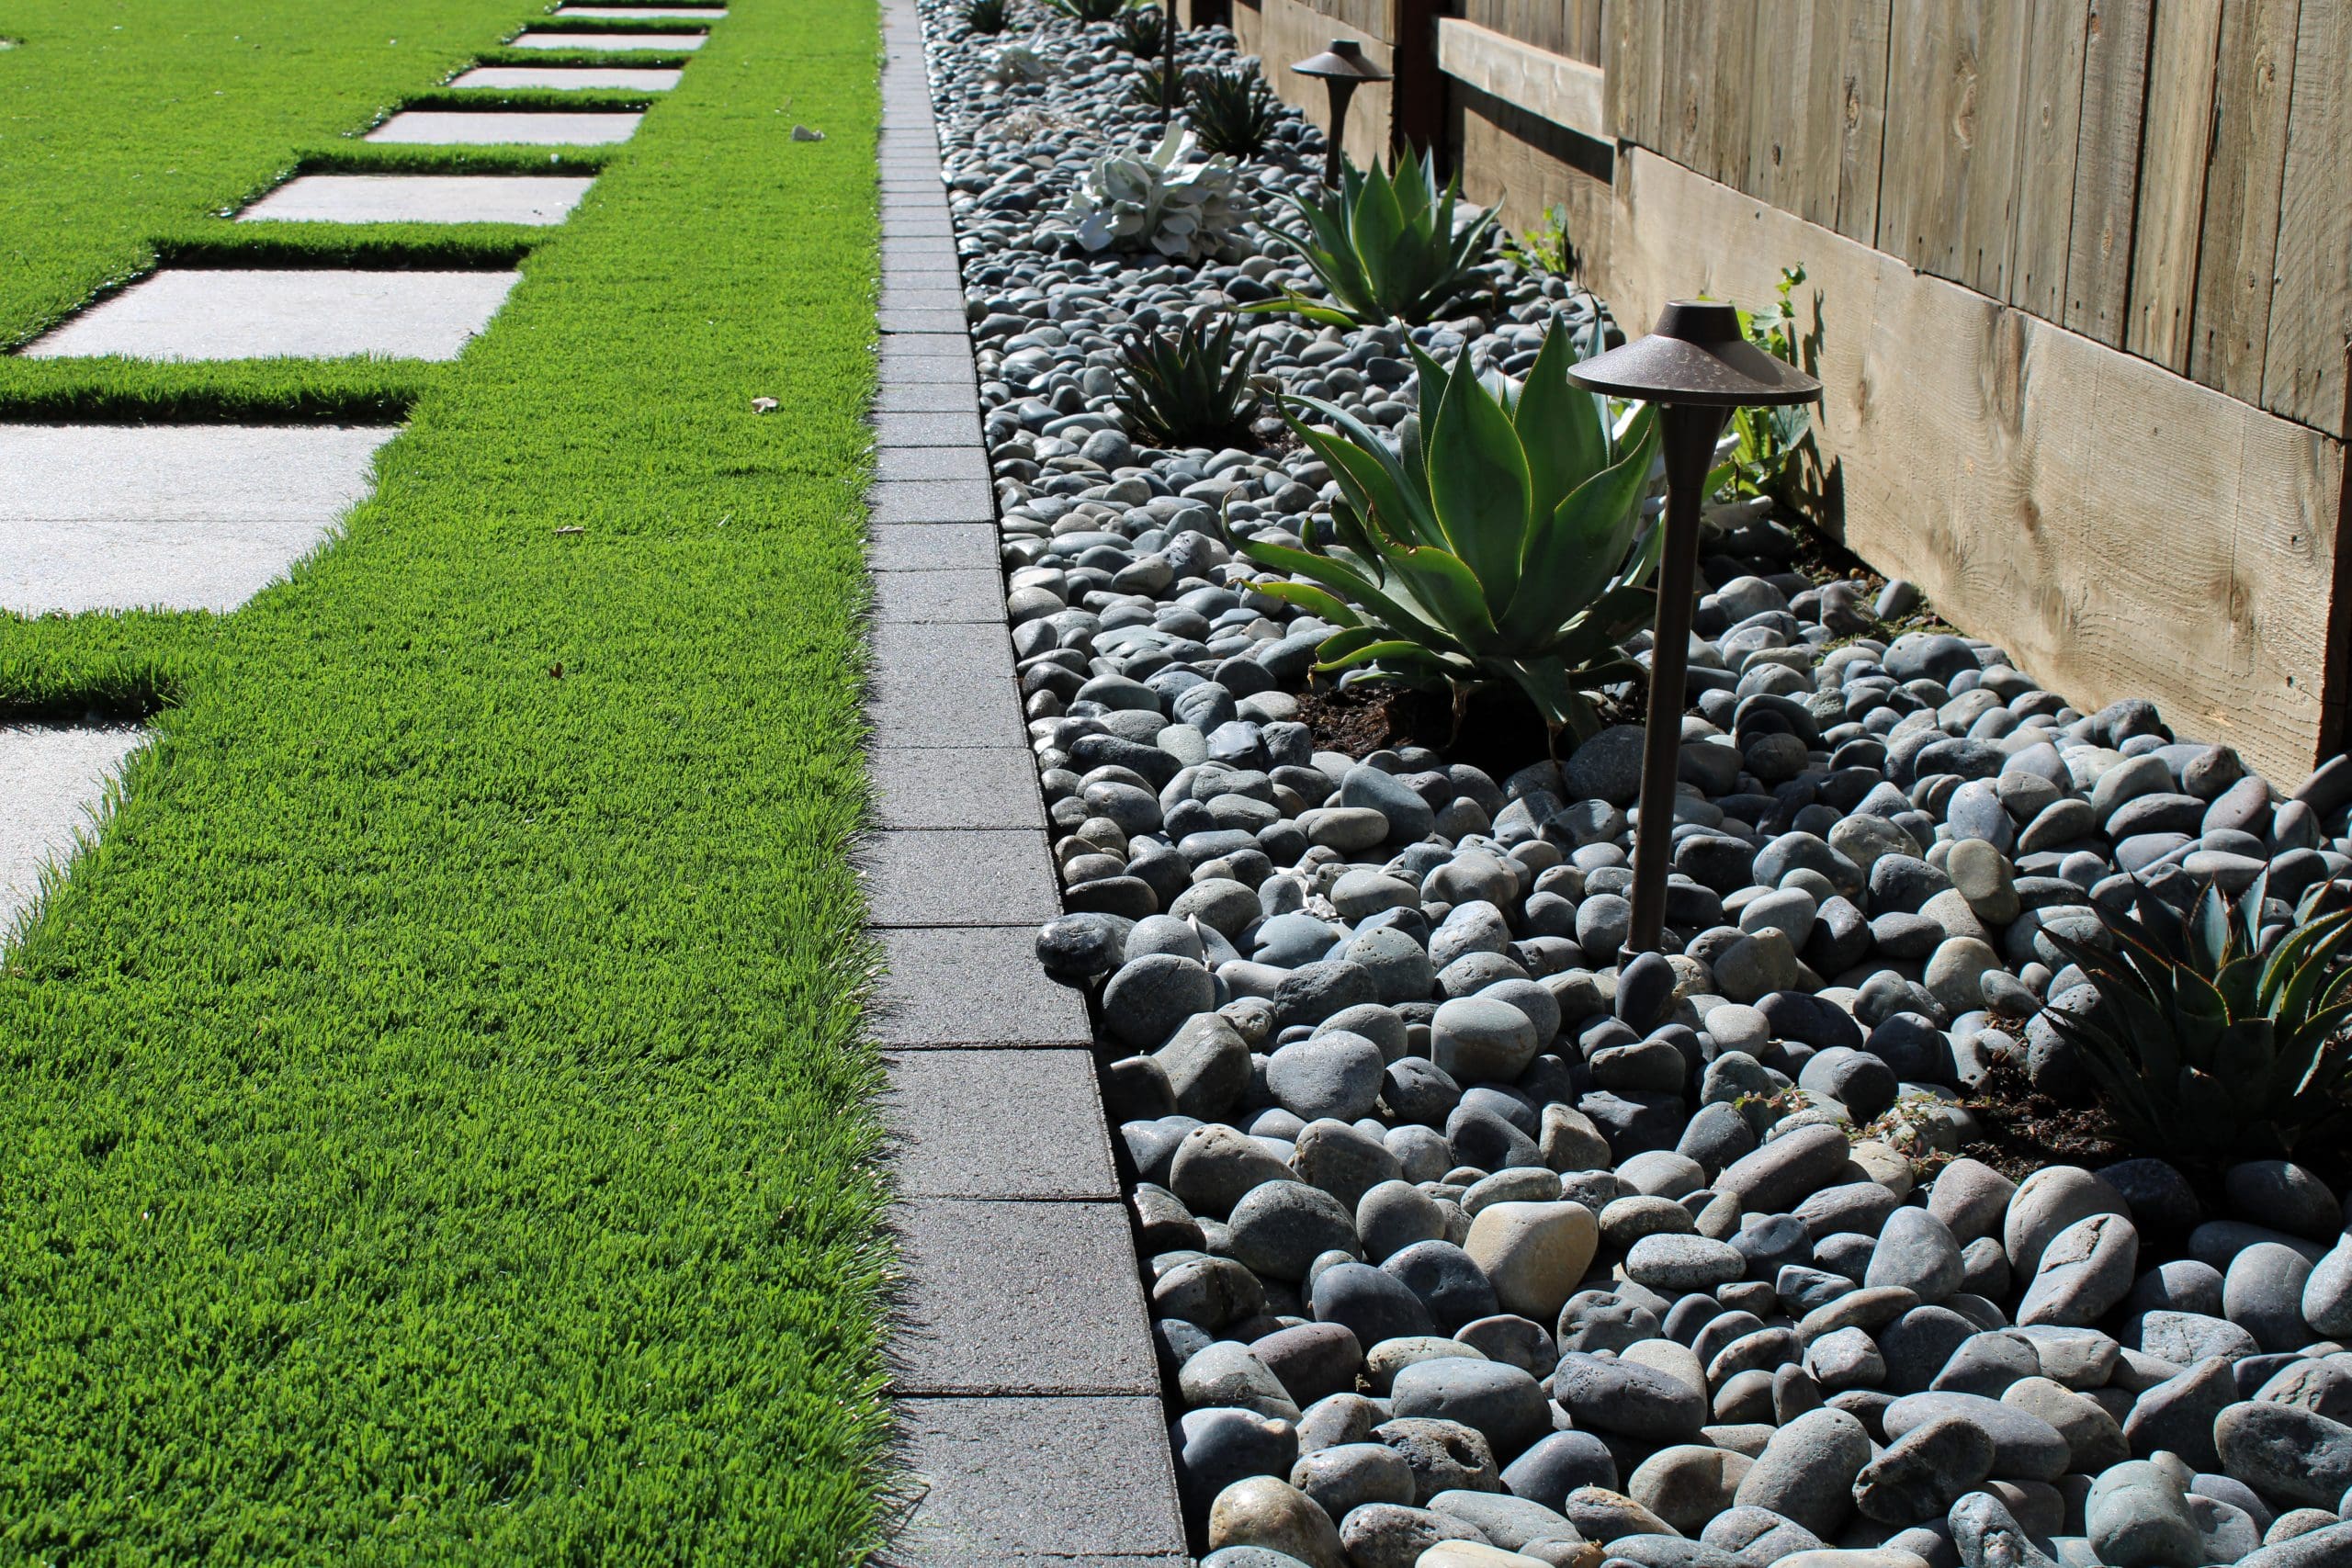 4 Reasons Landscaping with River Rocks is Eco-Friendly